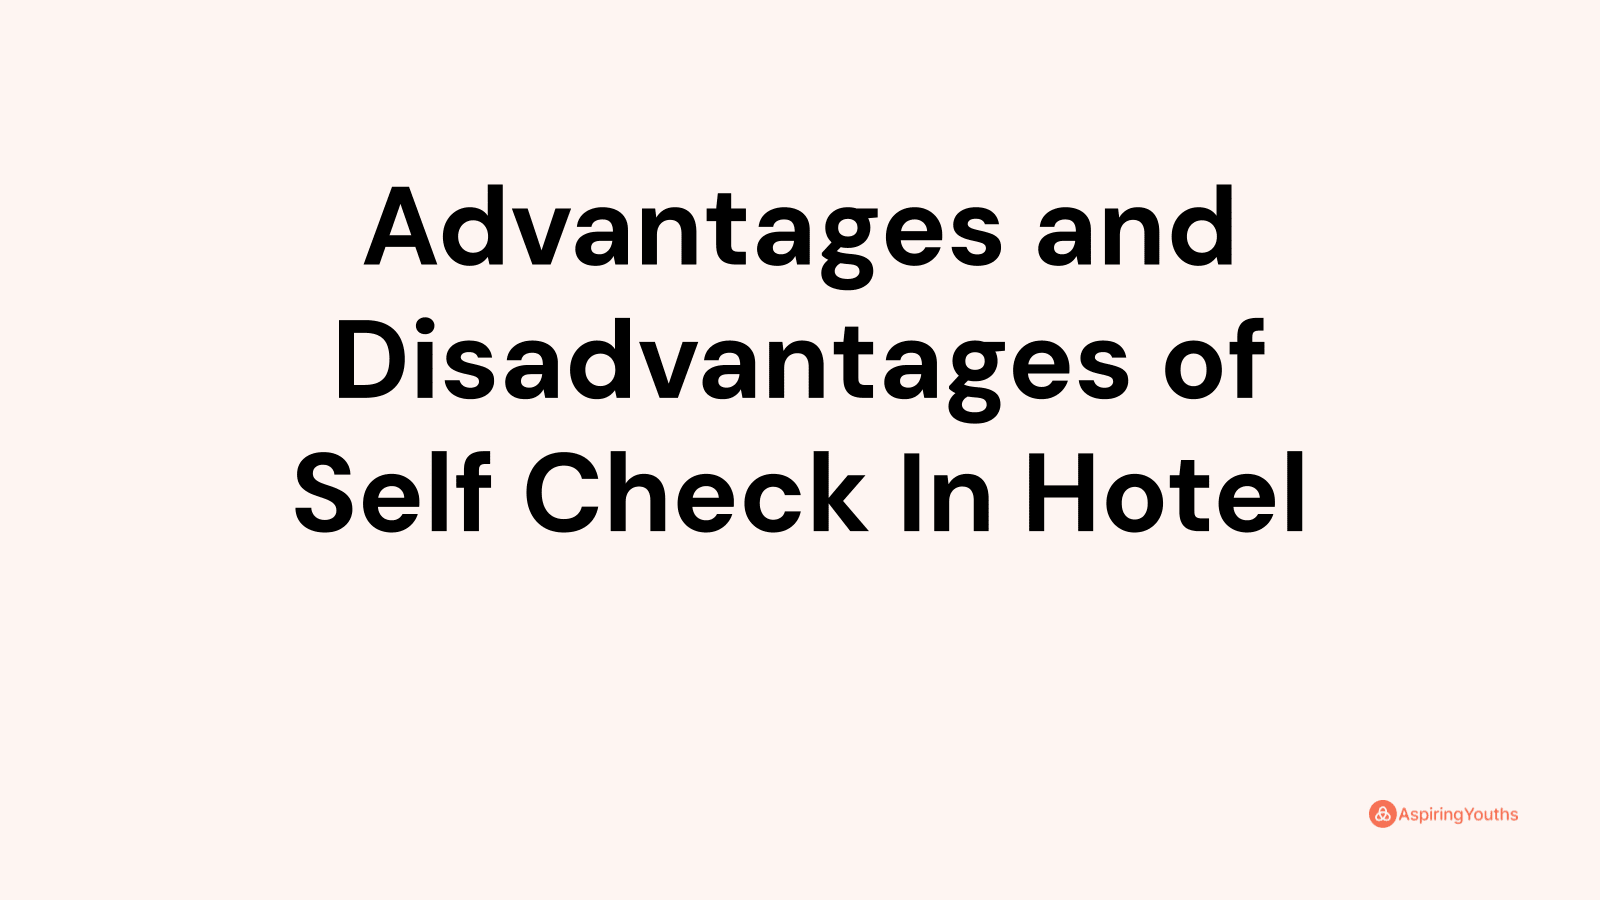 Advantages and disadvantages of Self Check In Hotel